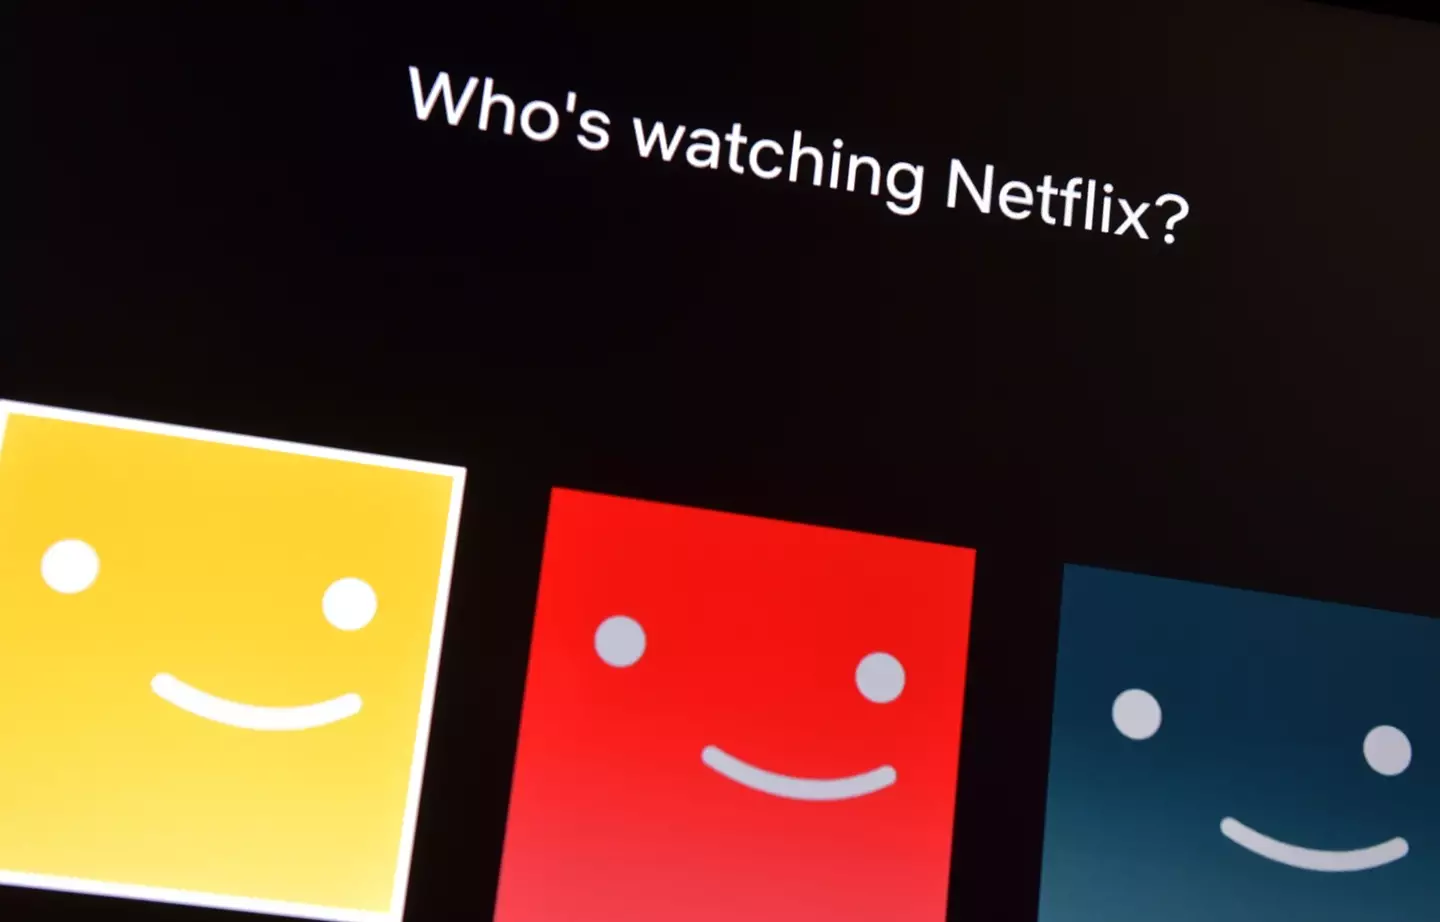 People violate copyright law when they watch Netflix shows without paying subs.